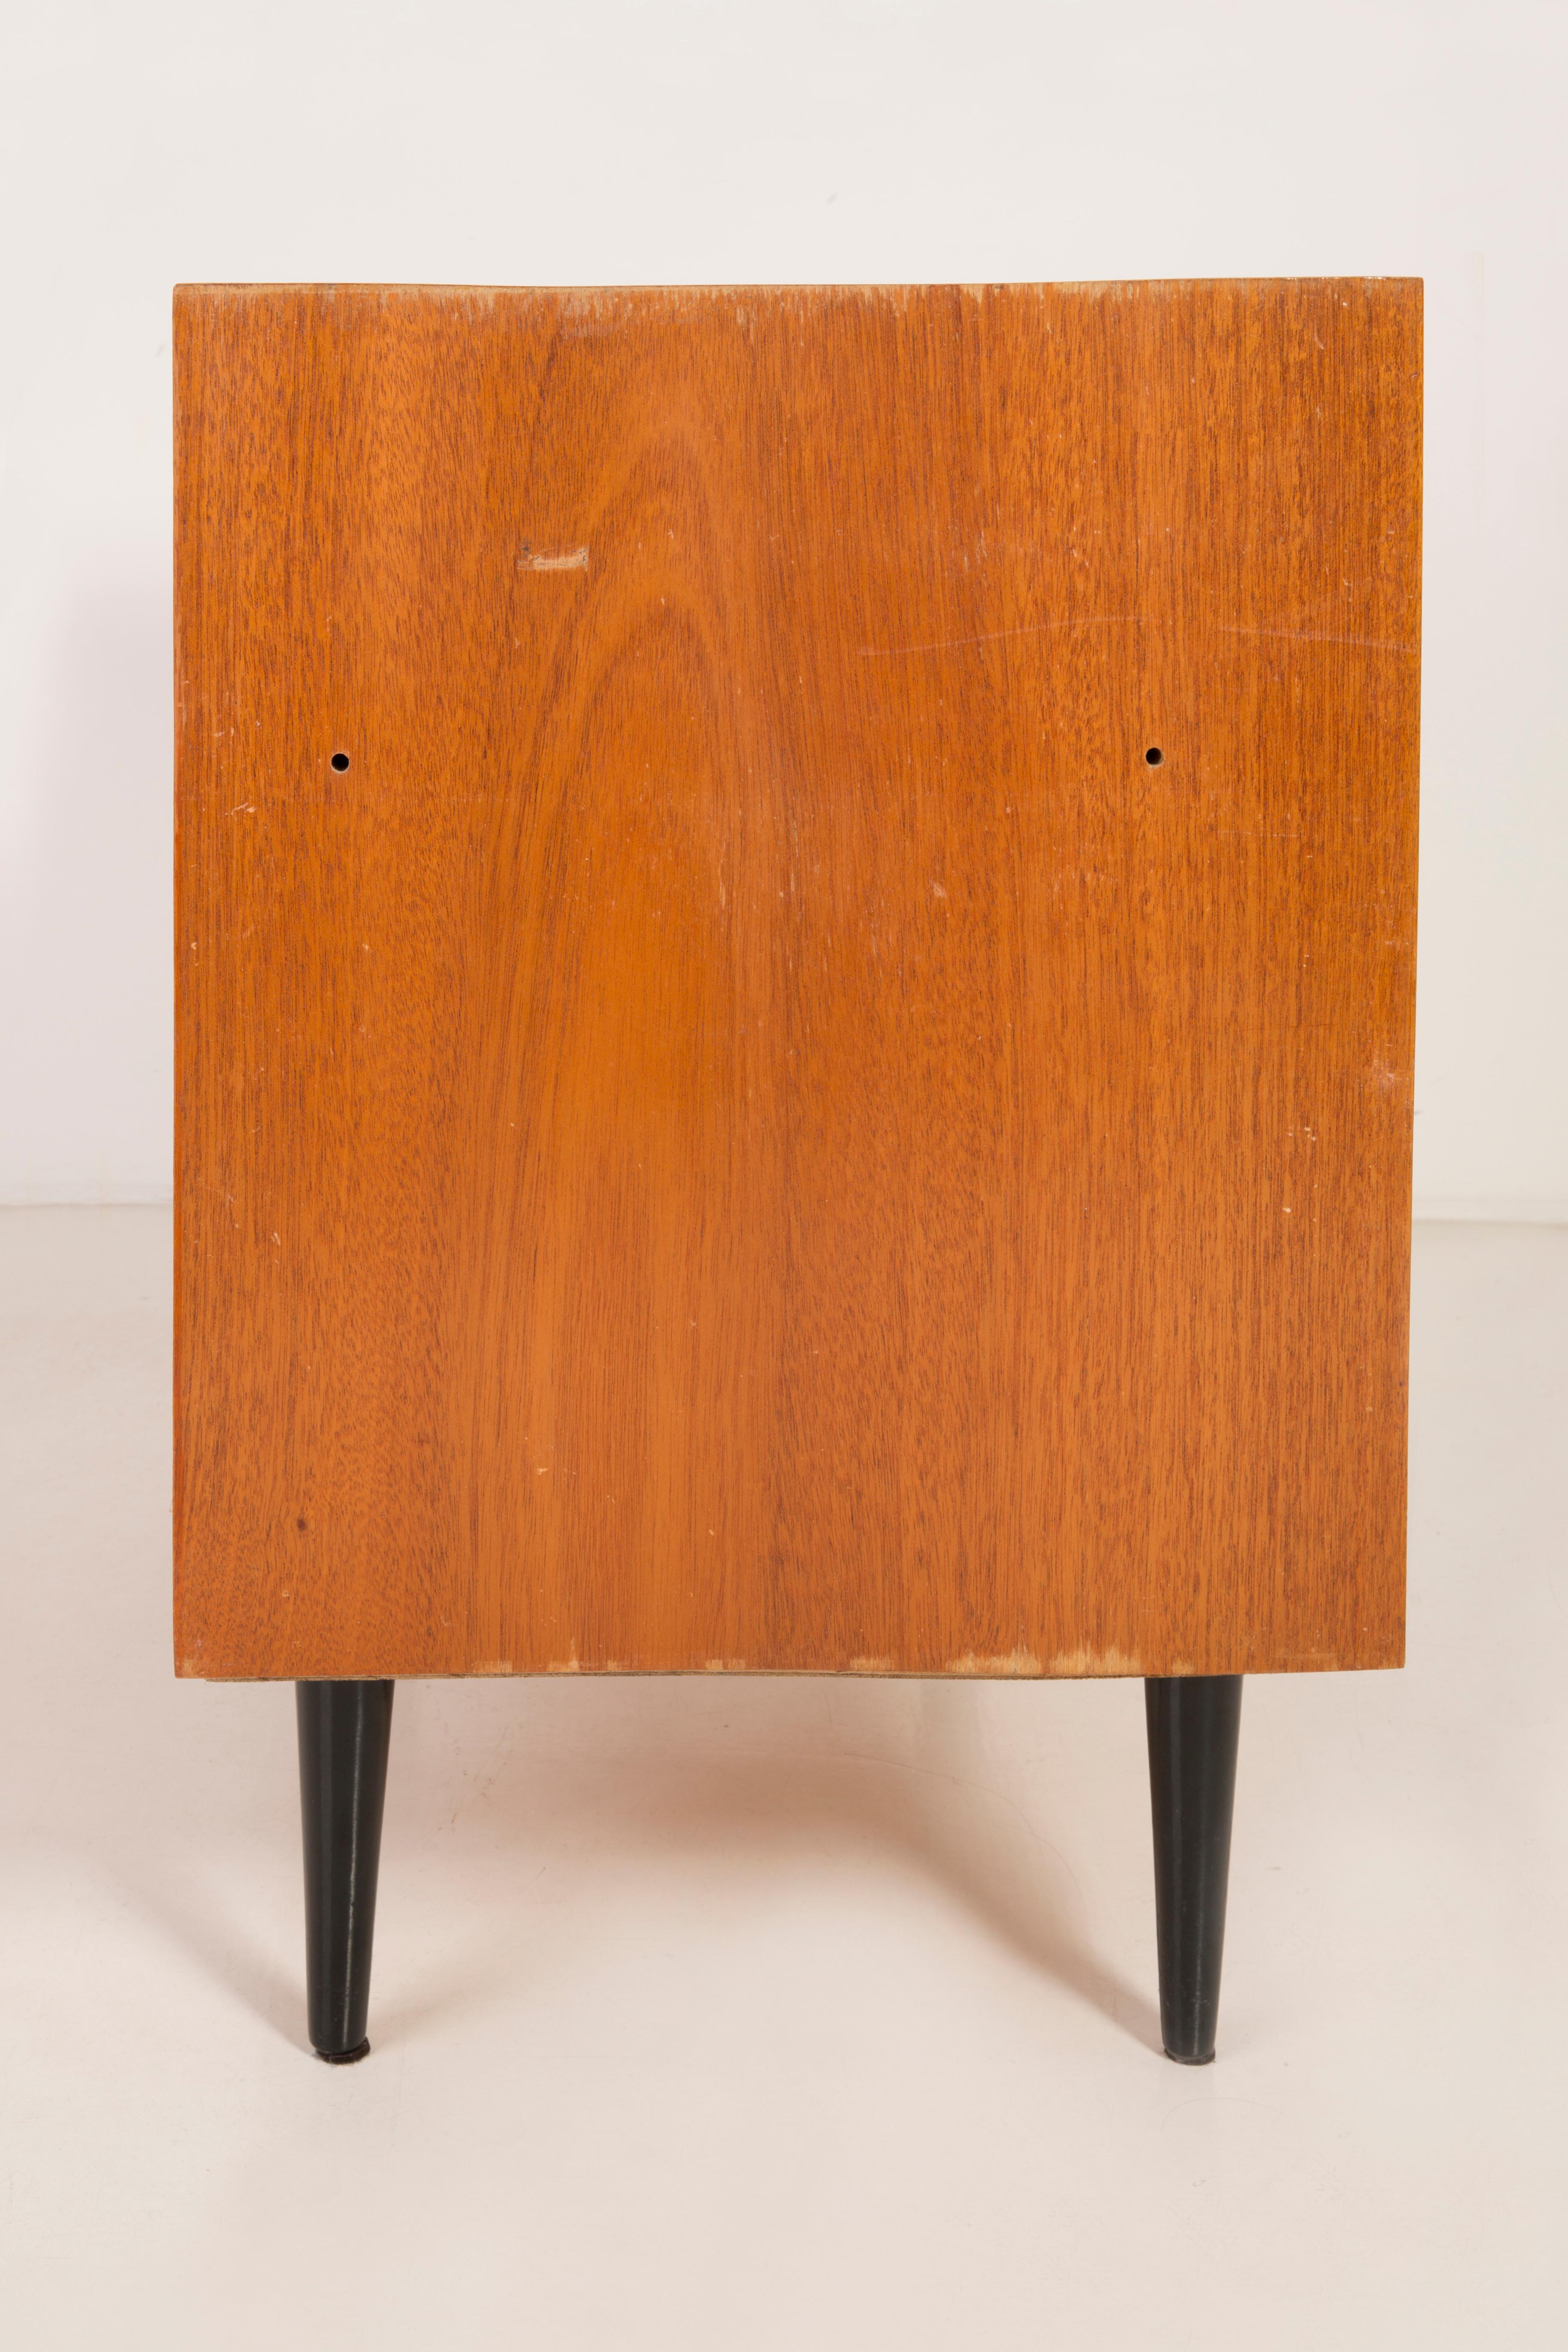 Hand-Painted Midcentury Vintage Sideboard, Wood, Poland, 1960s For Sale